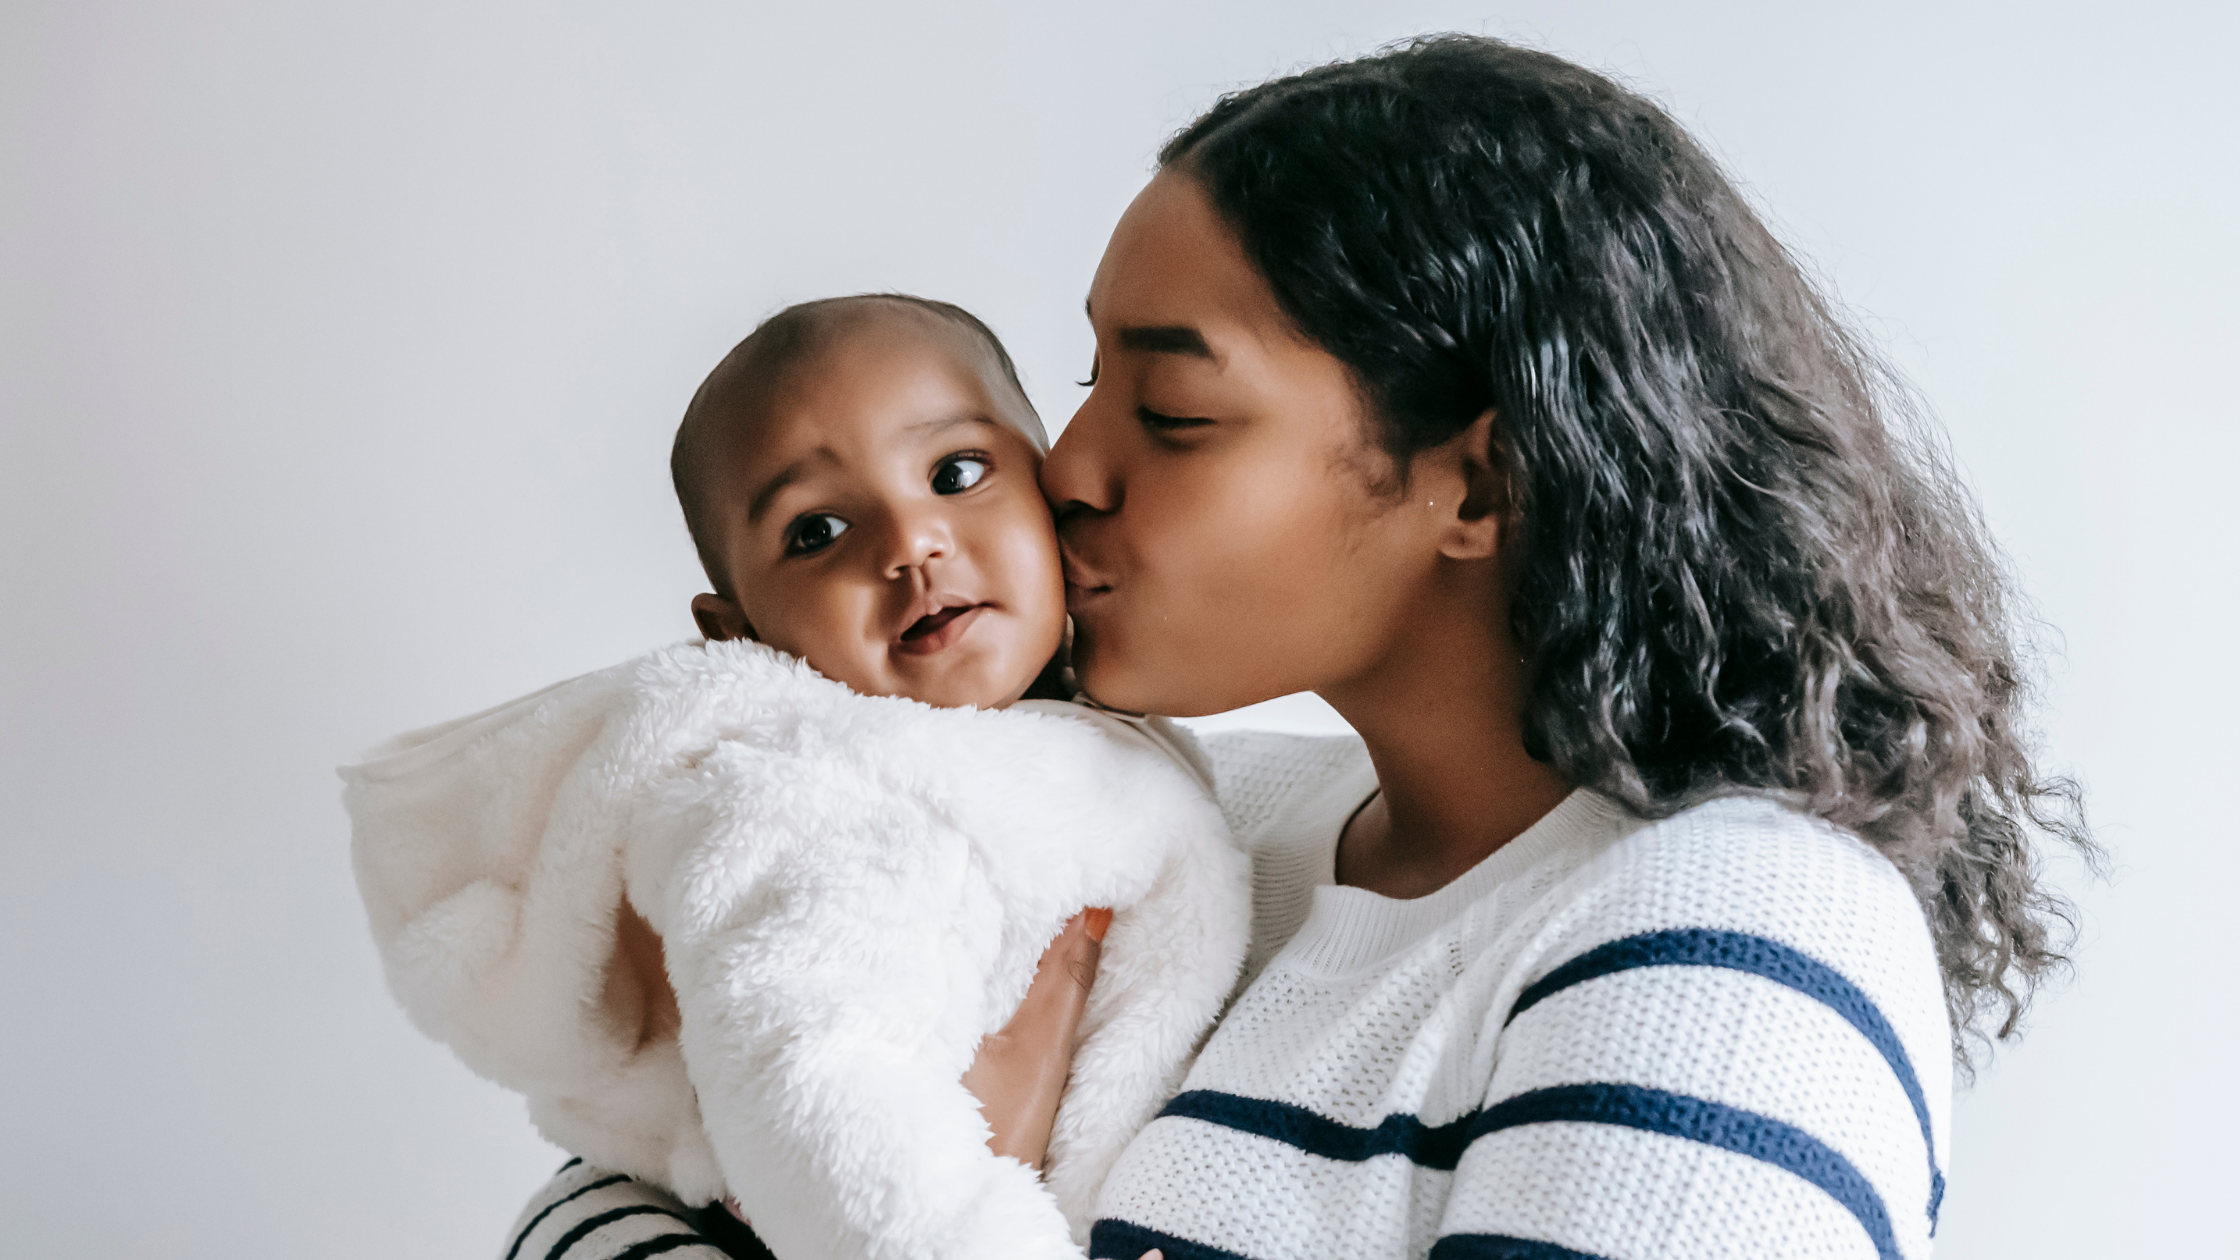 6 Tips To Help Maintain Your Mental Health After Having a Baby